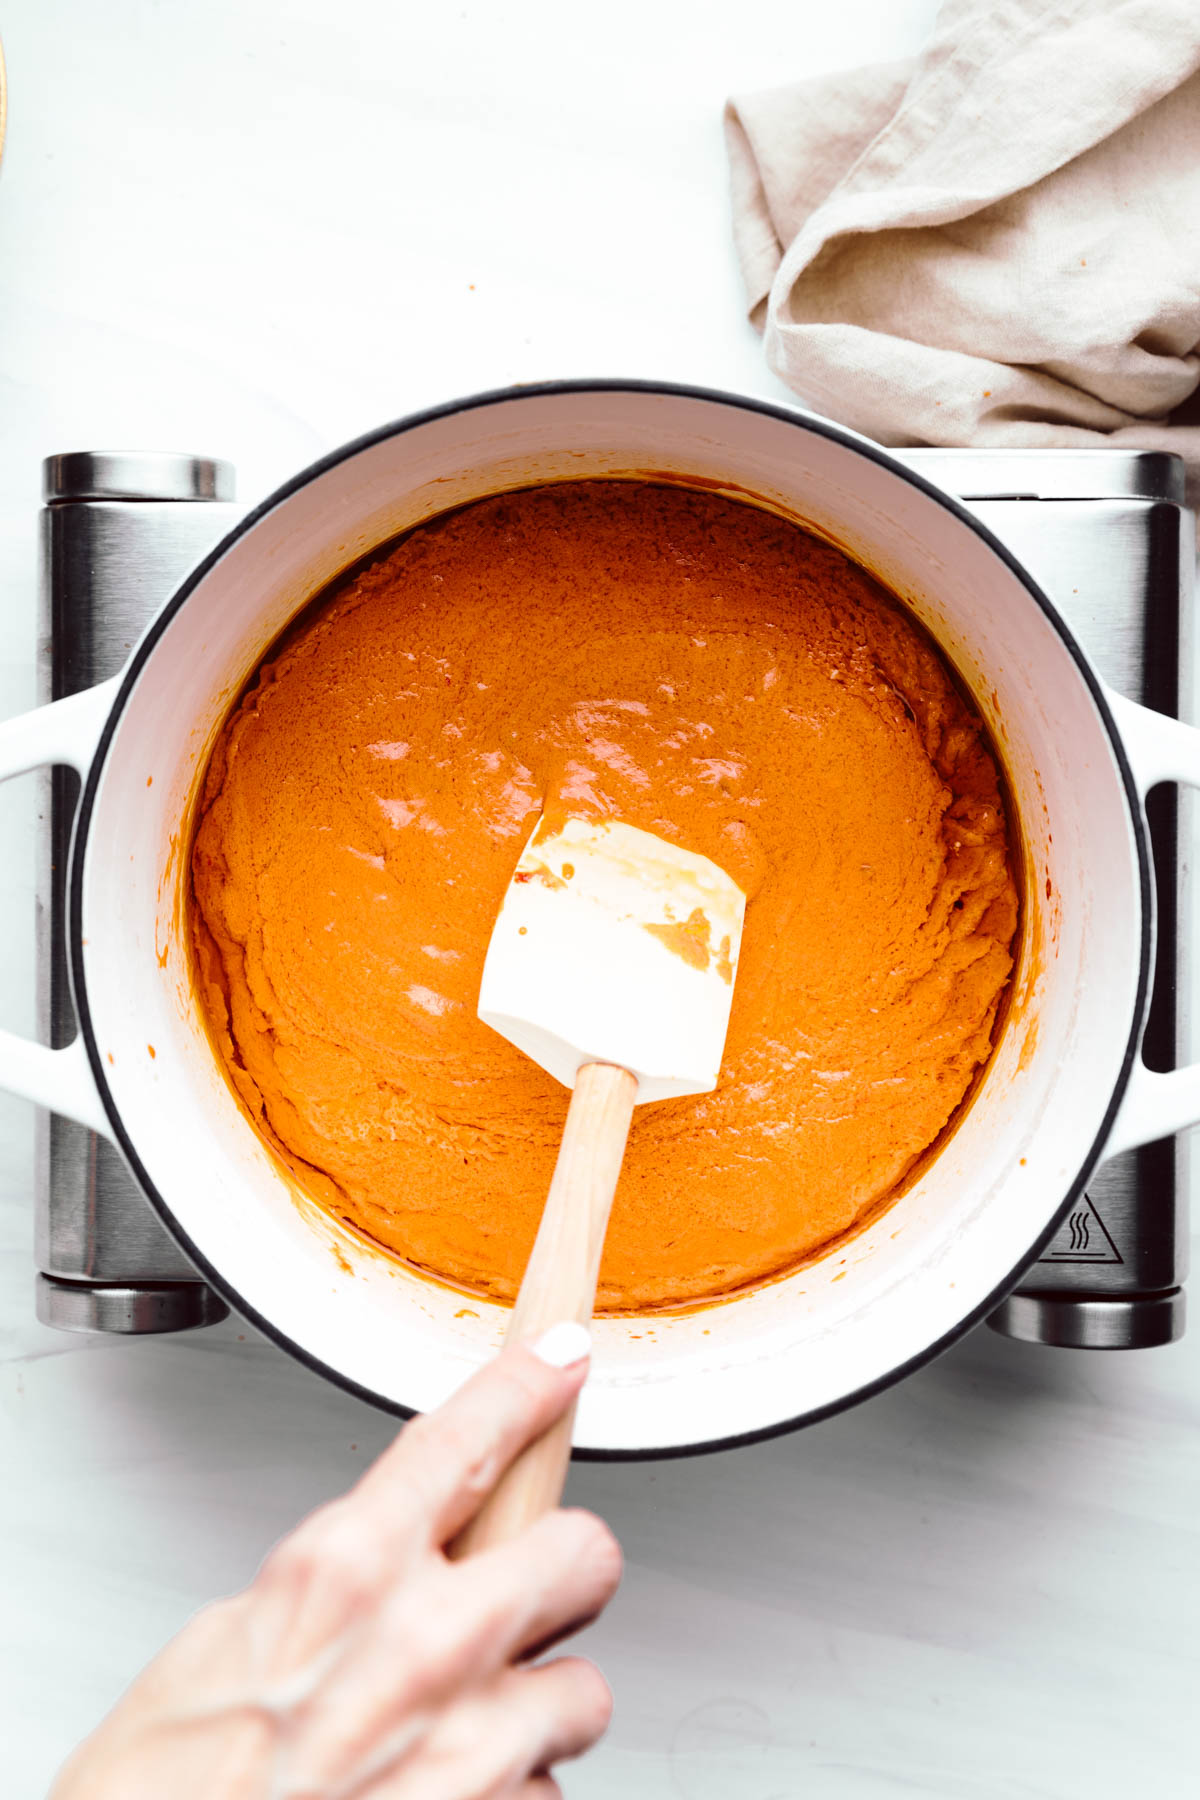 A large white pot with a thick orange colored sauce in it and a hand holding a spatula in the pot on a little stove with a napkin next to it.